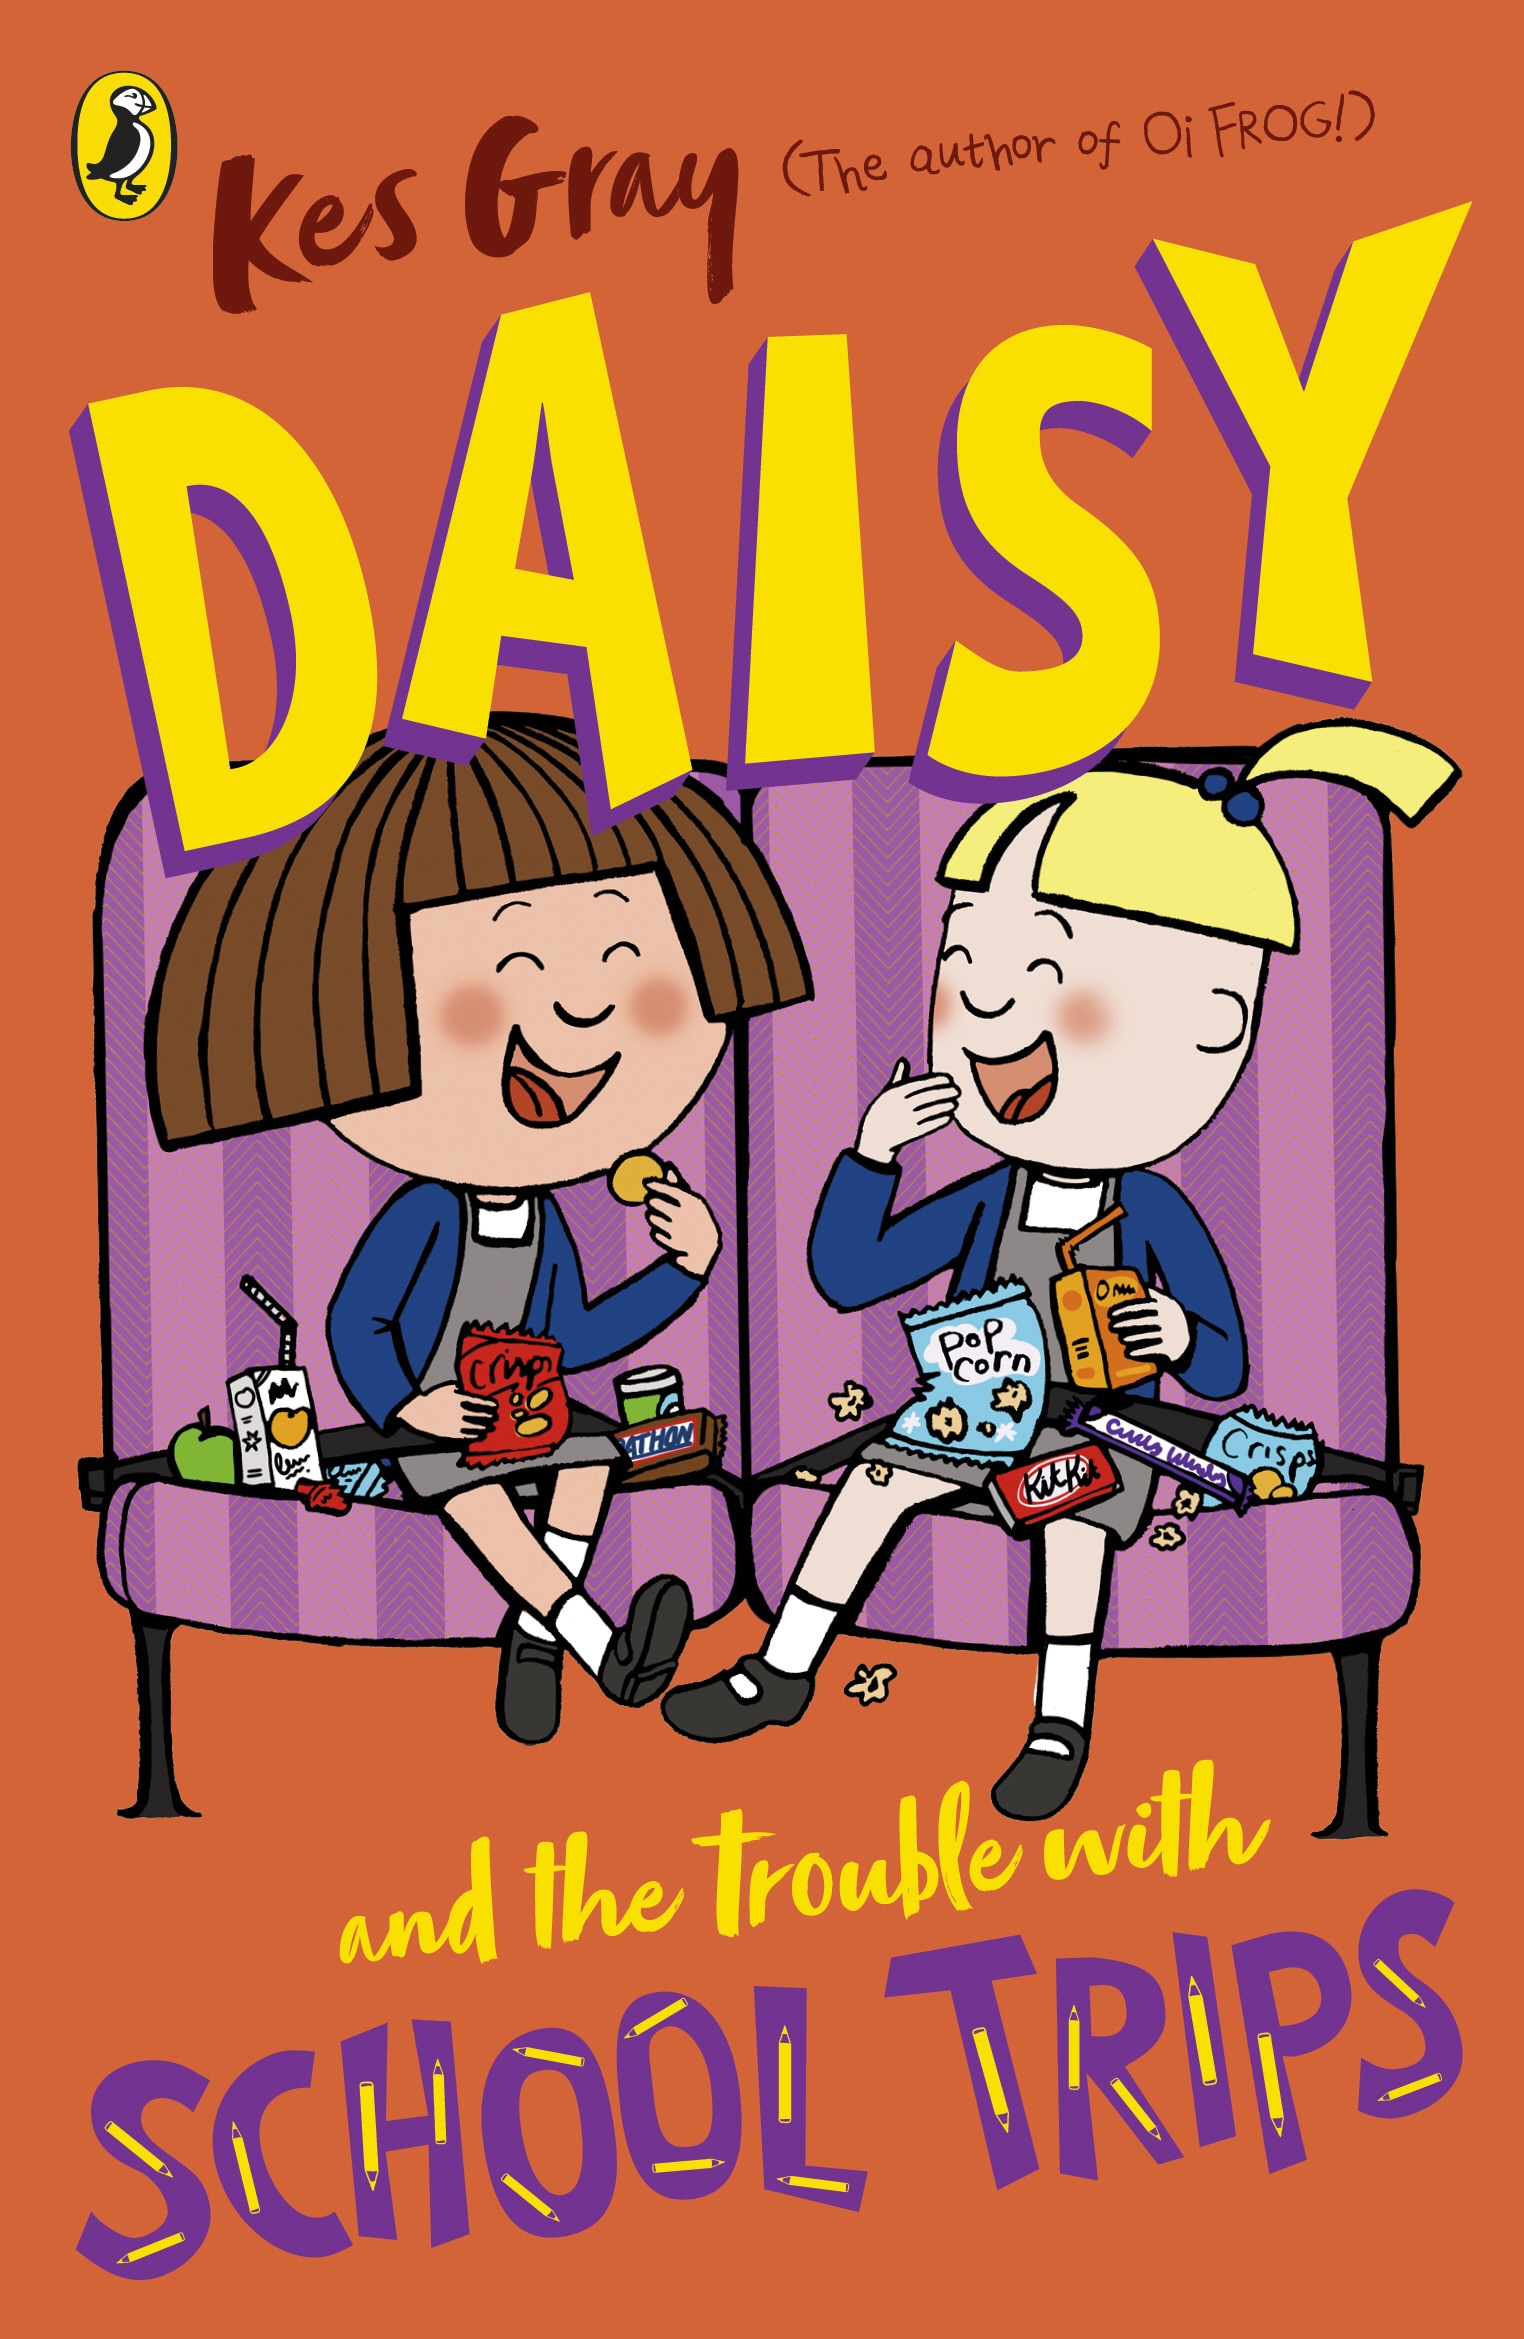 Book “Daisy and the Trouble with School Trips” by Kes Gray — July 9, 2020